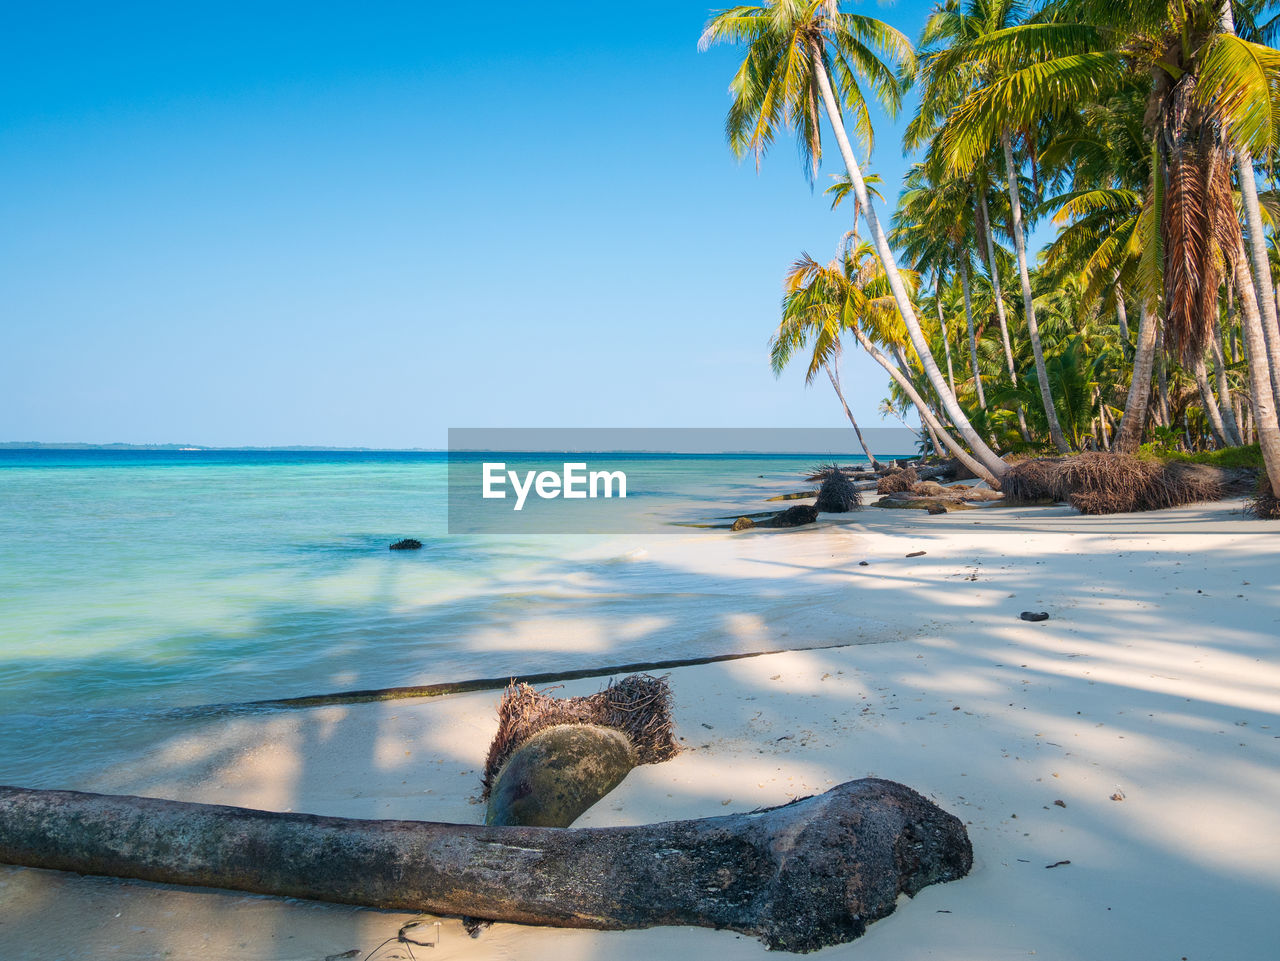 water, sea, tropical climate, land, palm tree, beach, ocean, nature, tree, shore, sky, beauty in nature, vacation, tranquility, scenics - nature, travel destinations, body of water, tranquil scene, coast, travel, sand, relaxation, horizon over water, island, blue, idyllic, trip, holiday, plant, horizon, coconut palm tree, bay, tropics, tropical tree, day, sunlight, outdoors, no people, clear sky, tourism, environment, sunny, seascape, lagoon, summer, underwater, coastline